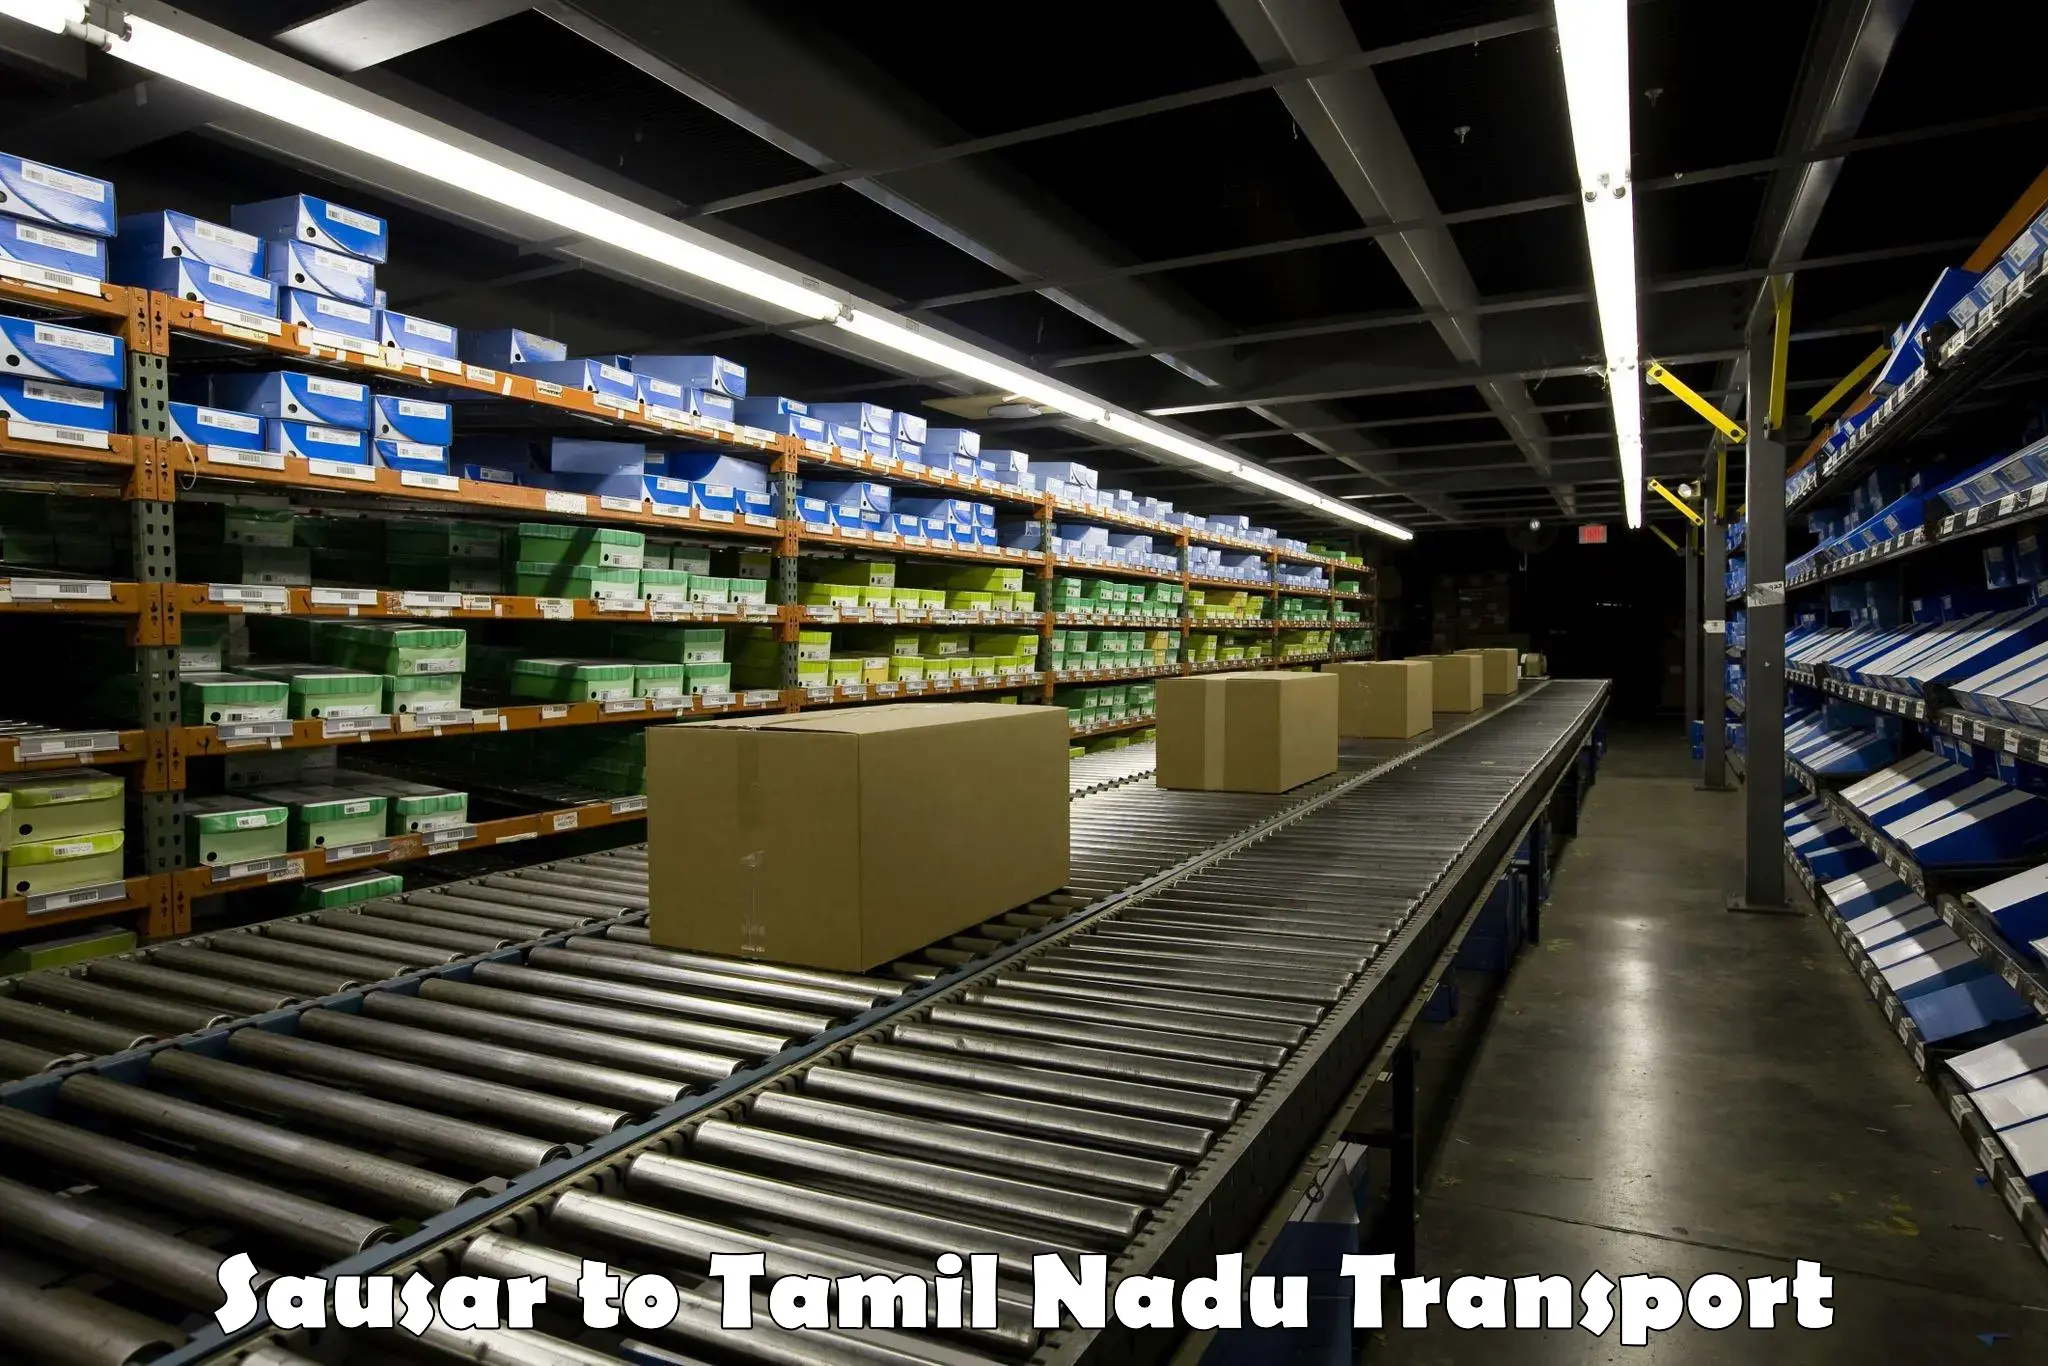 Road transport online services Sausar to Palayankottai